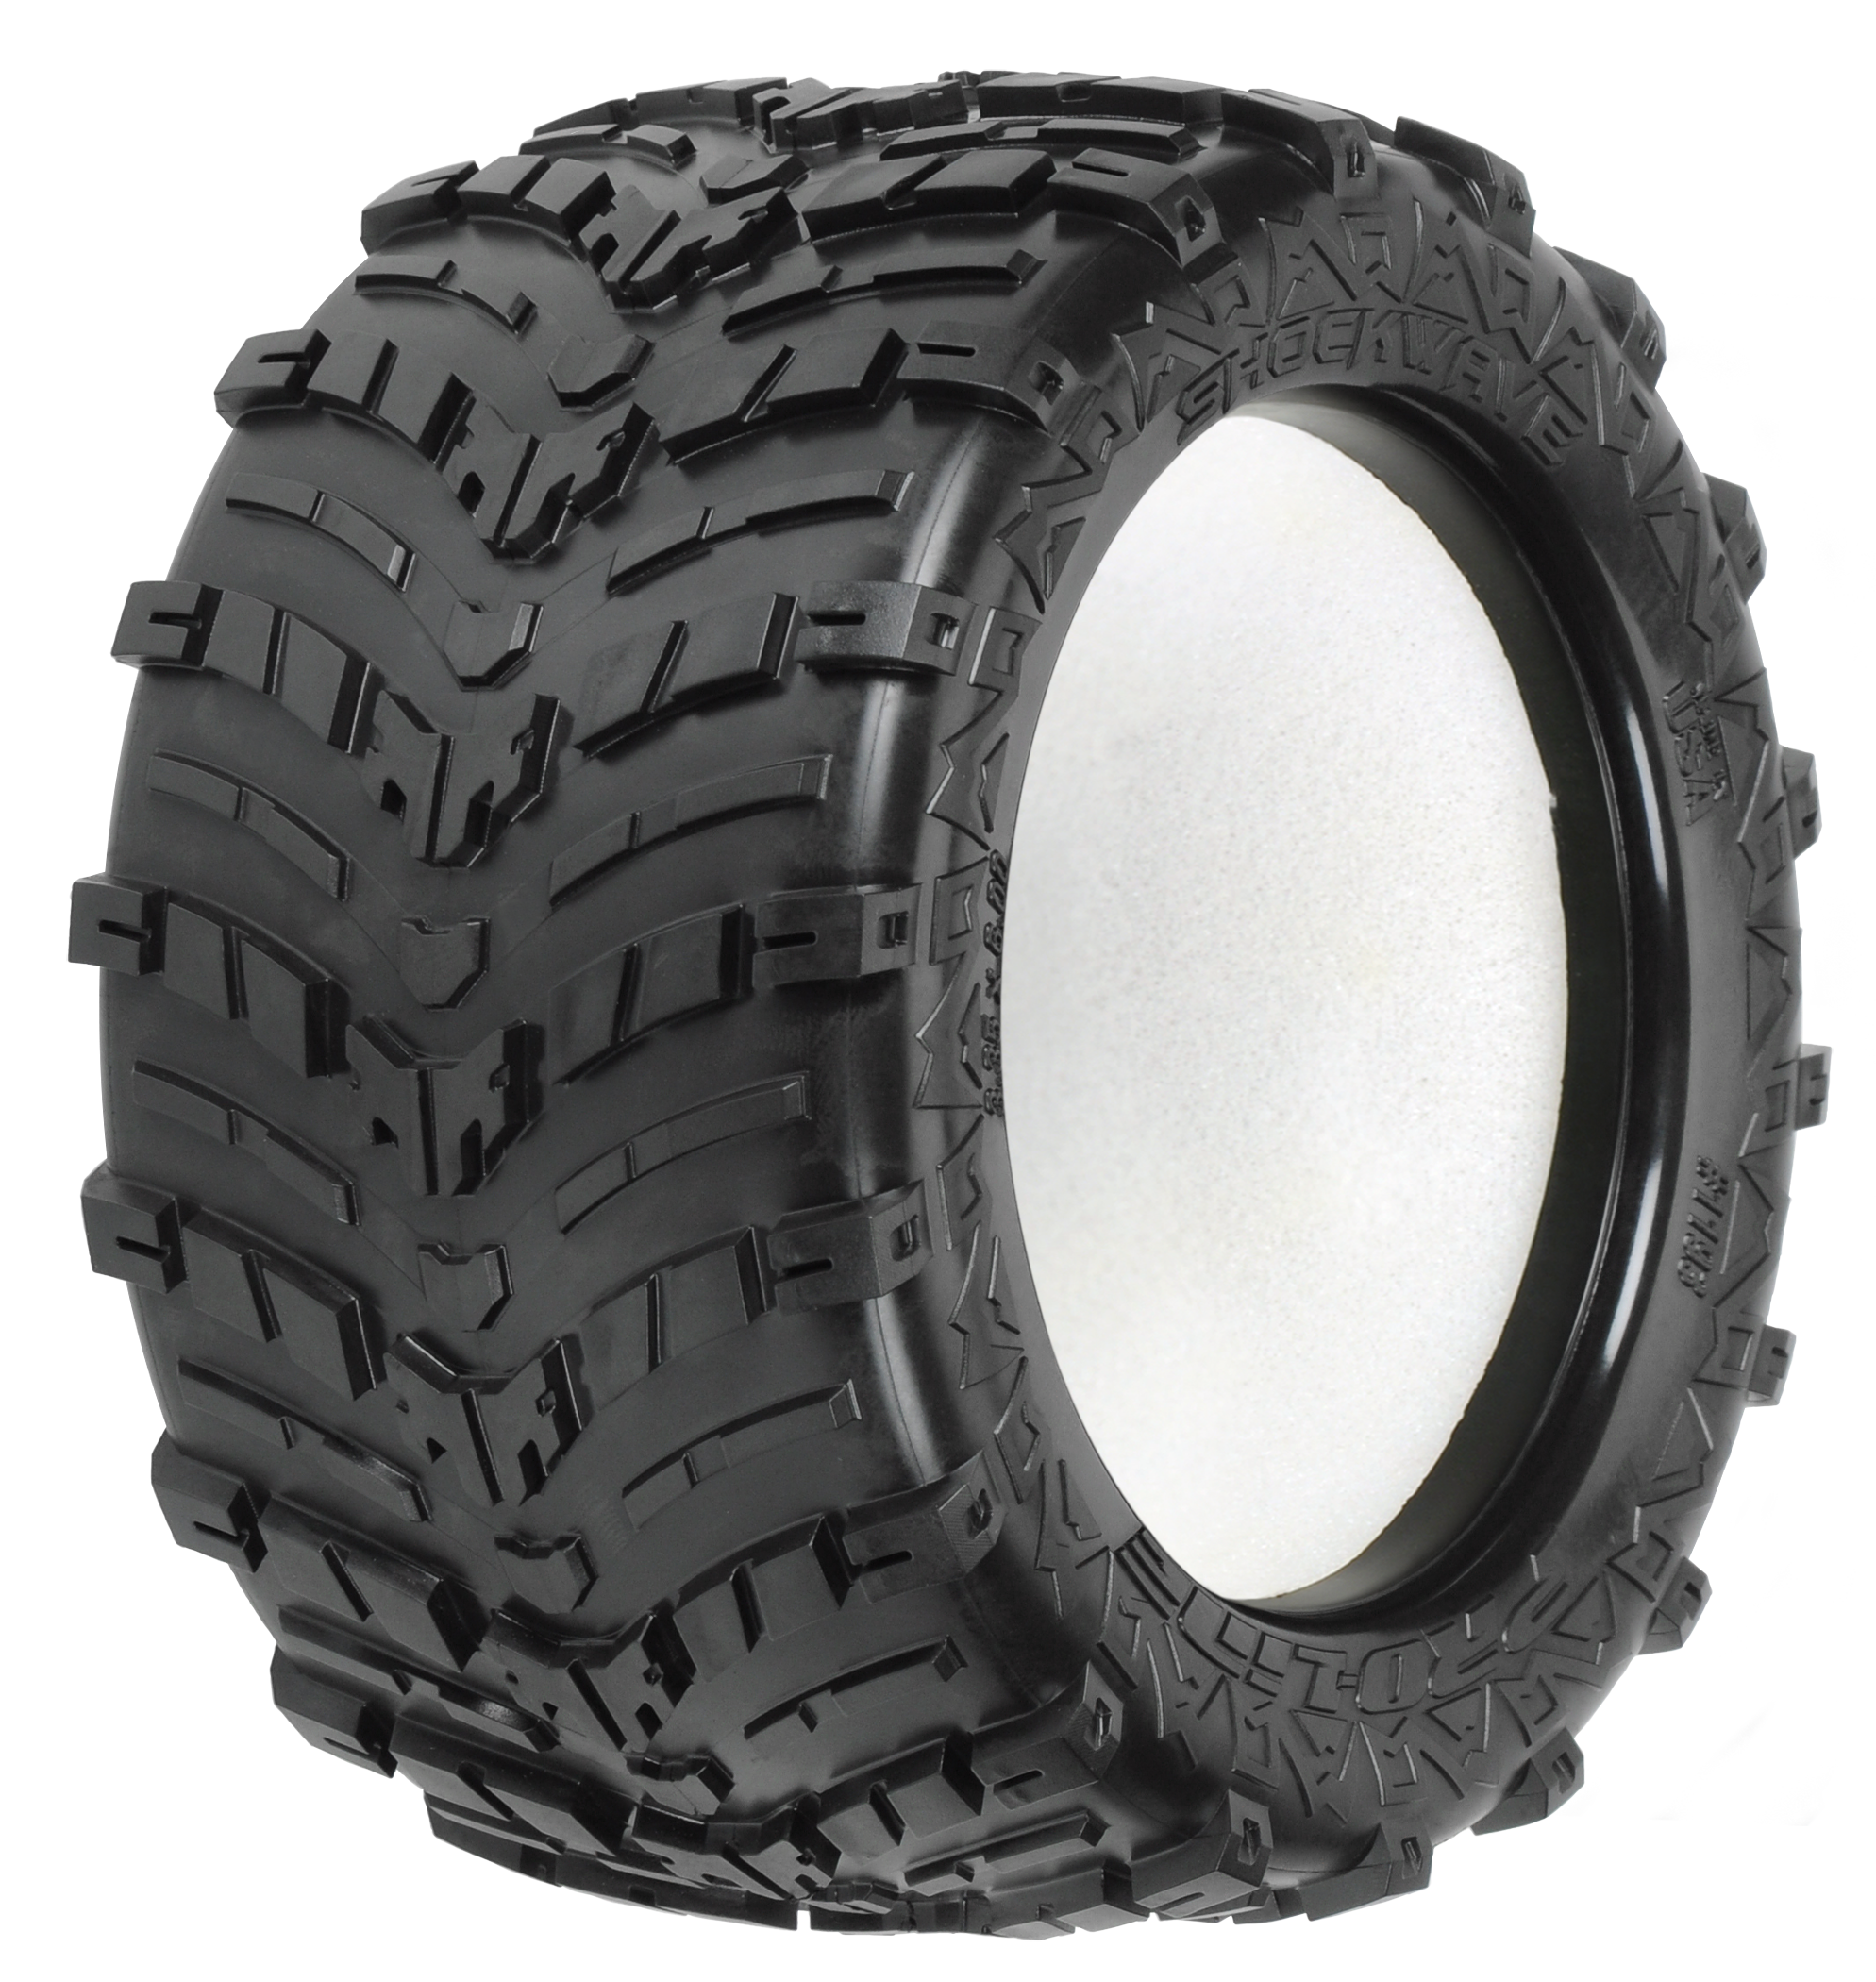 Pro Line Tires Monstertruck Parent Directory 00 Tires Monstertruck Zip Png Transparent Background Free Download 473 Freeiconspng